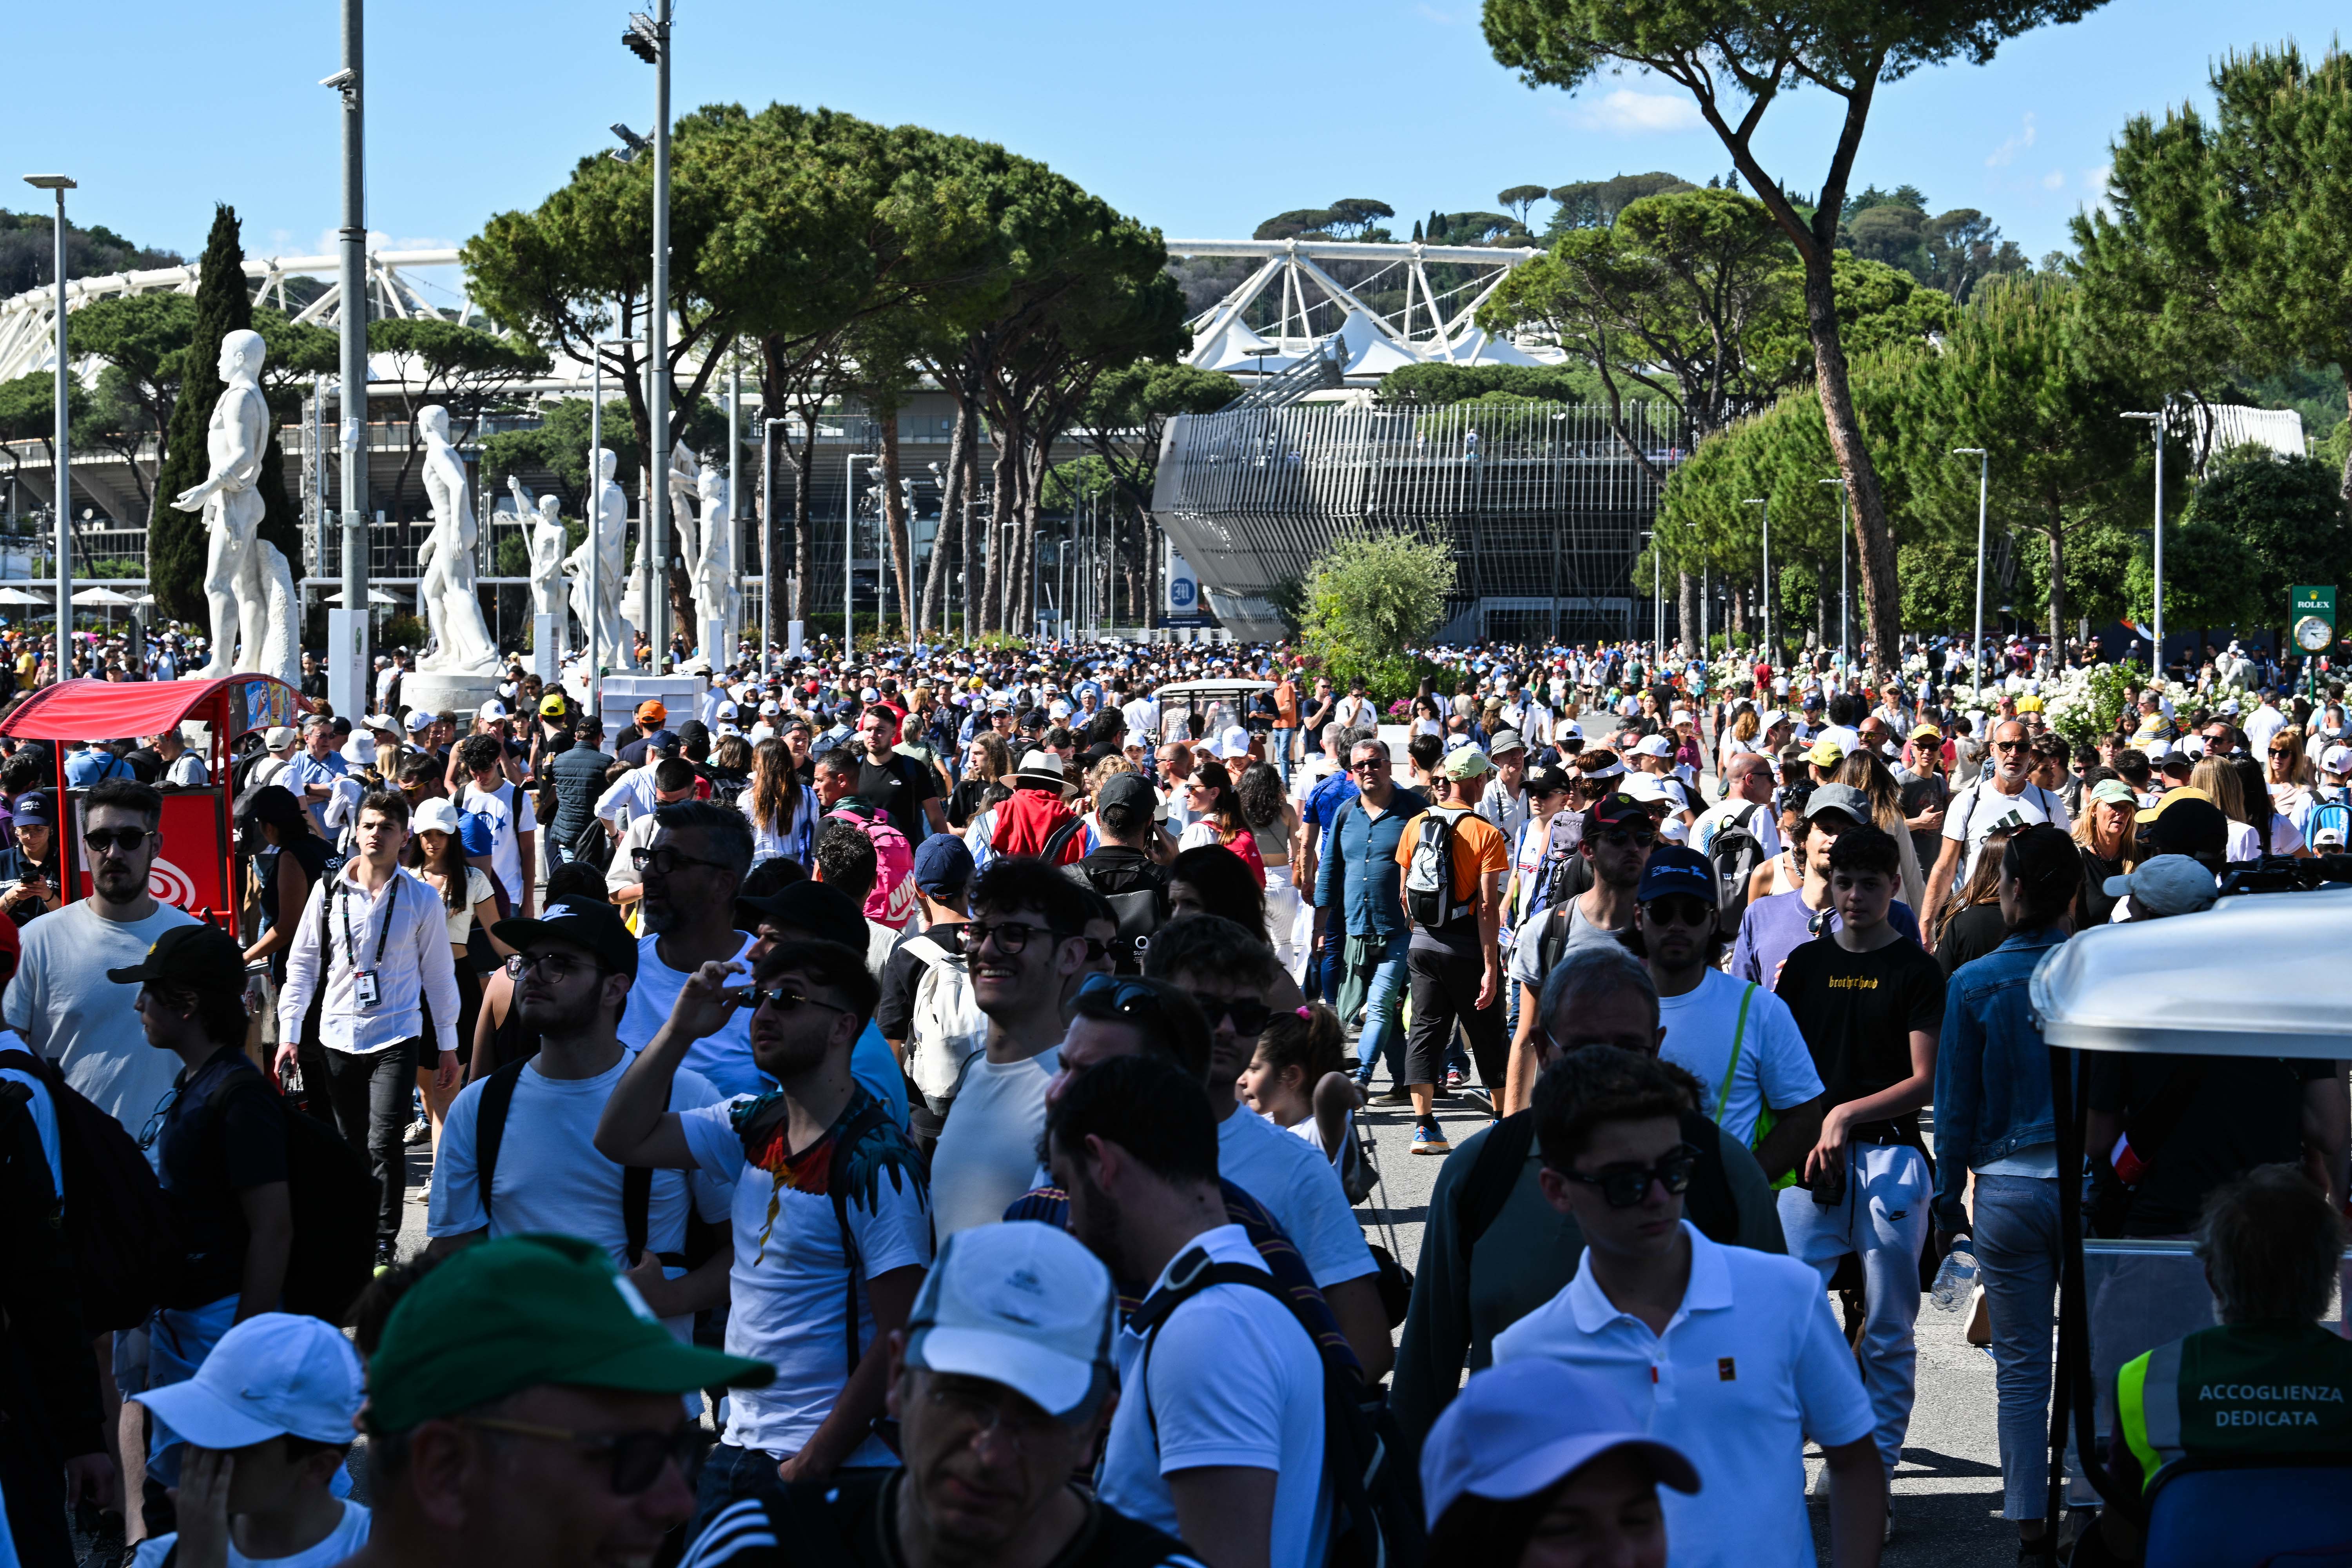 Internazionali BNL d’Italia 2024, the file ends.  “Foro Italico is the actual added worth of the event”